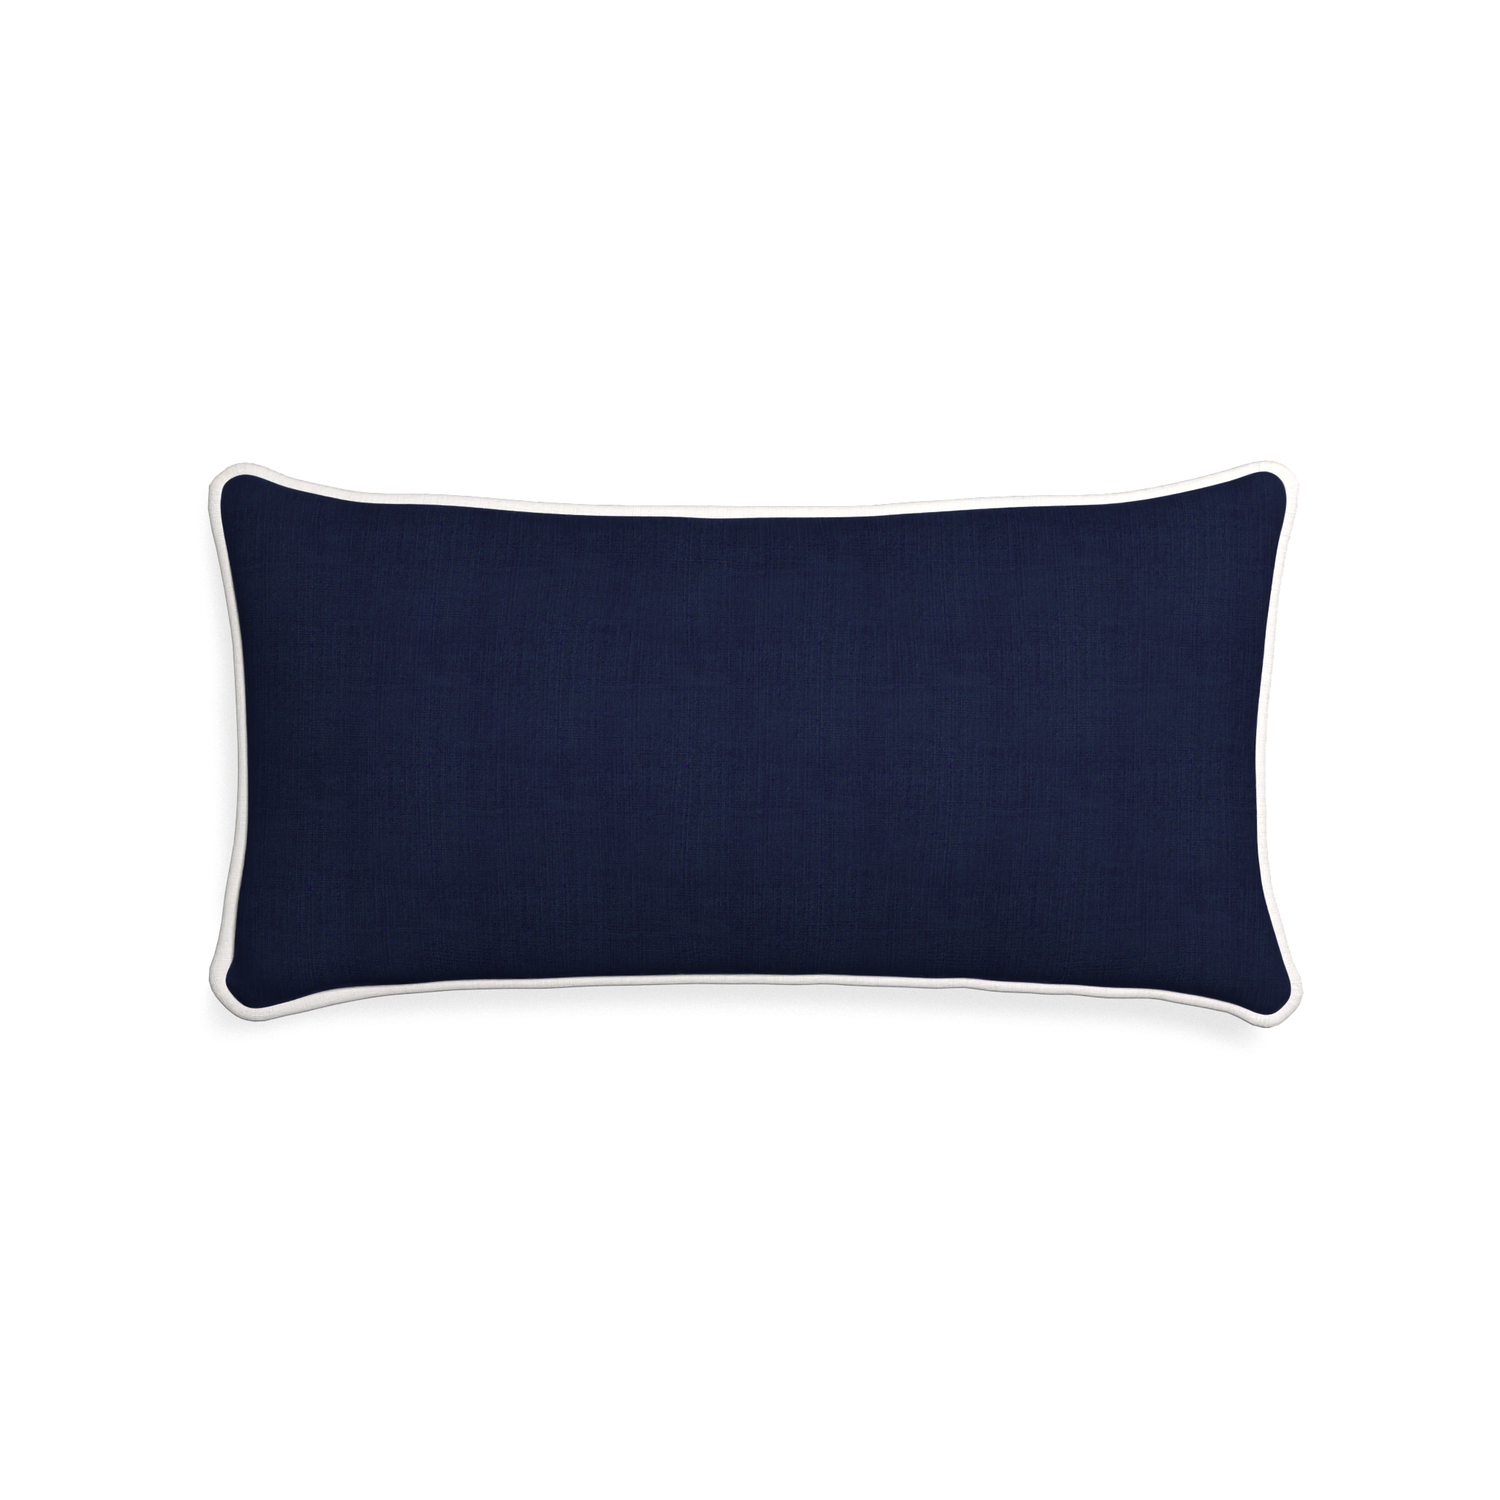 Midi-lumbar midnight custom navy bluepillow with snow piping on white background